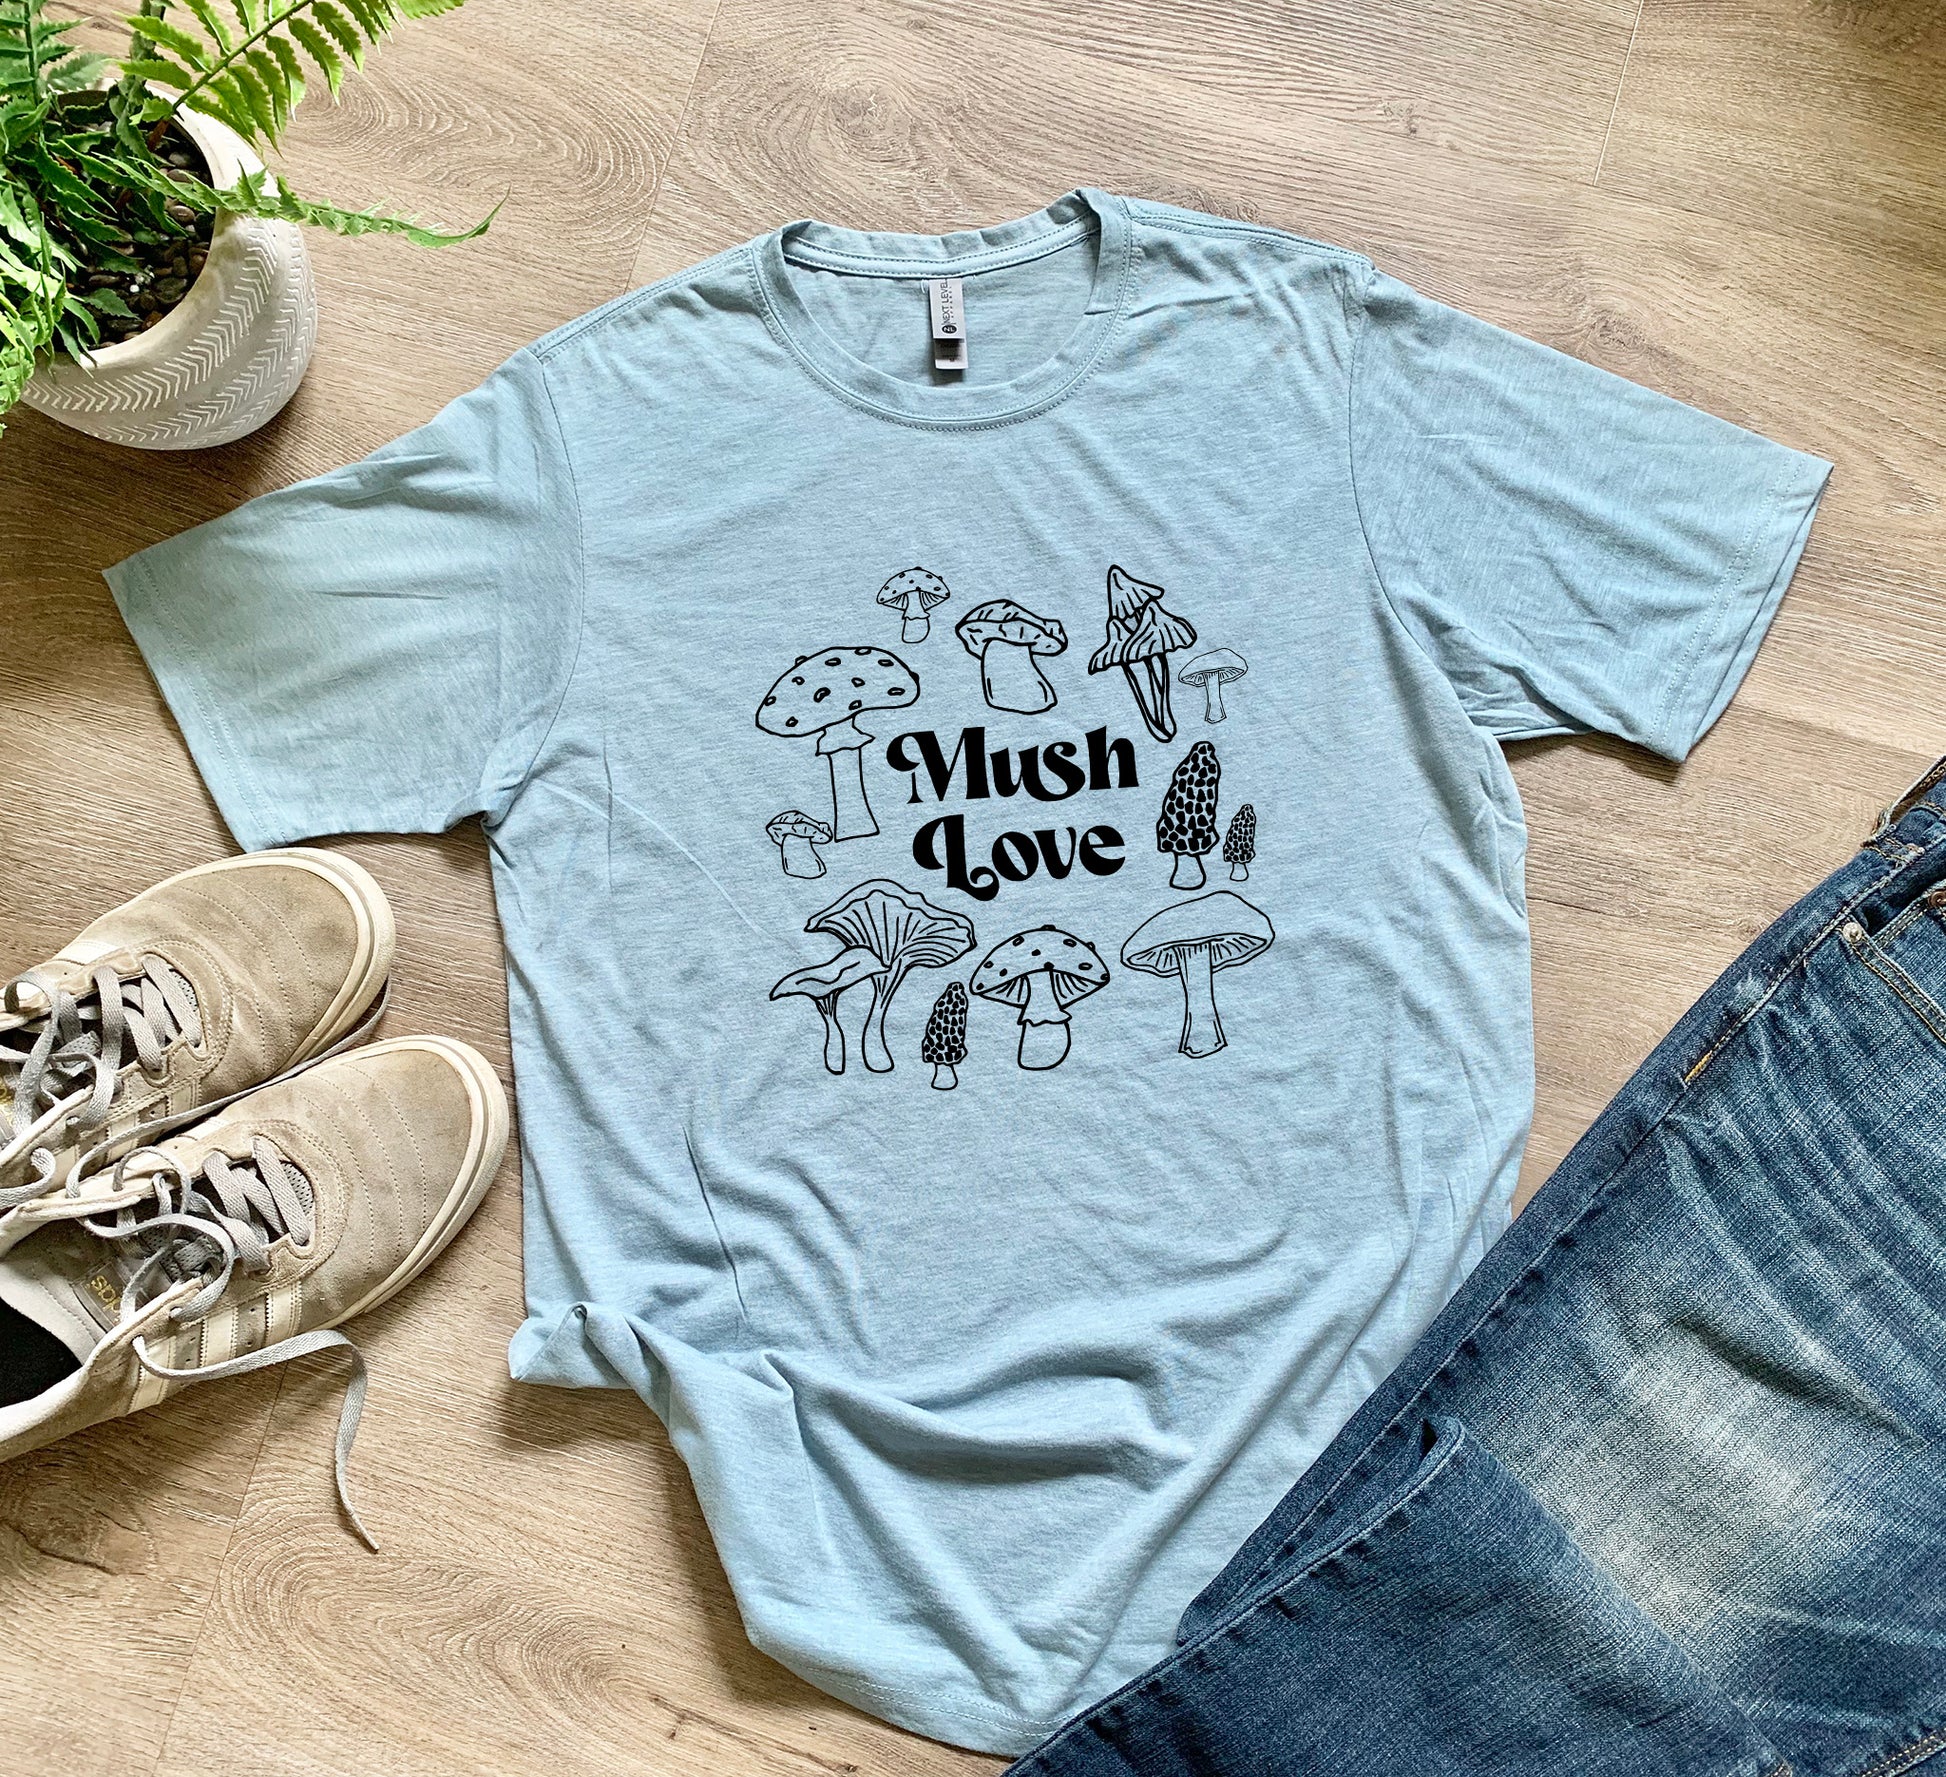 a t - shirt that says mush love surrounded by mushrooms